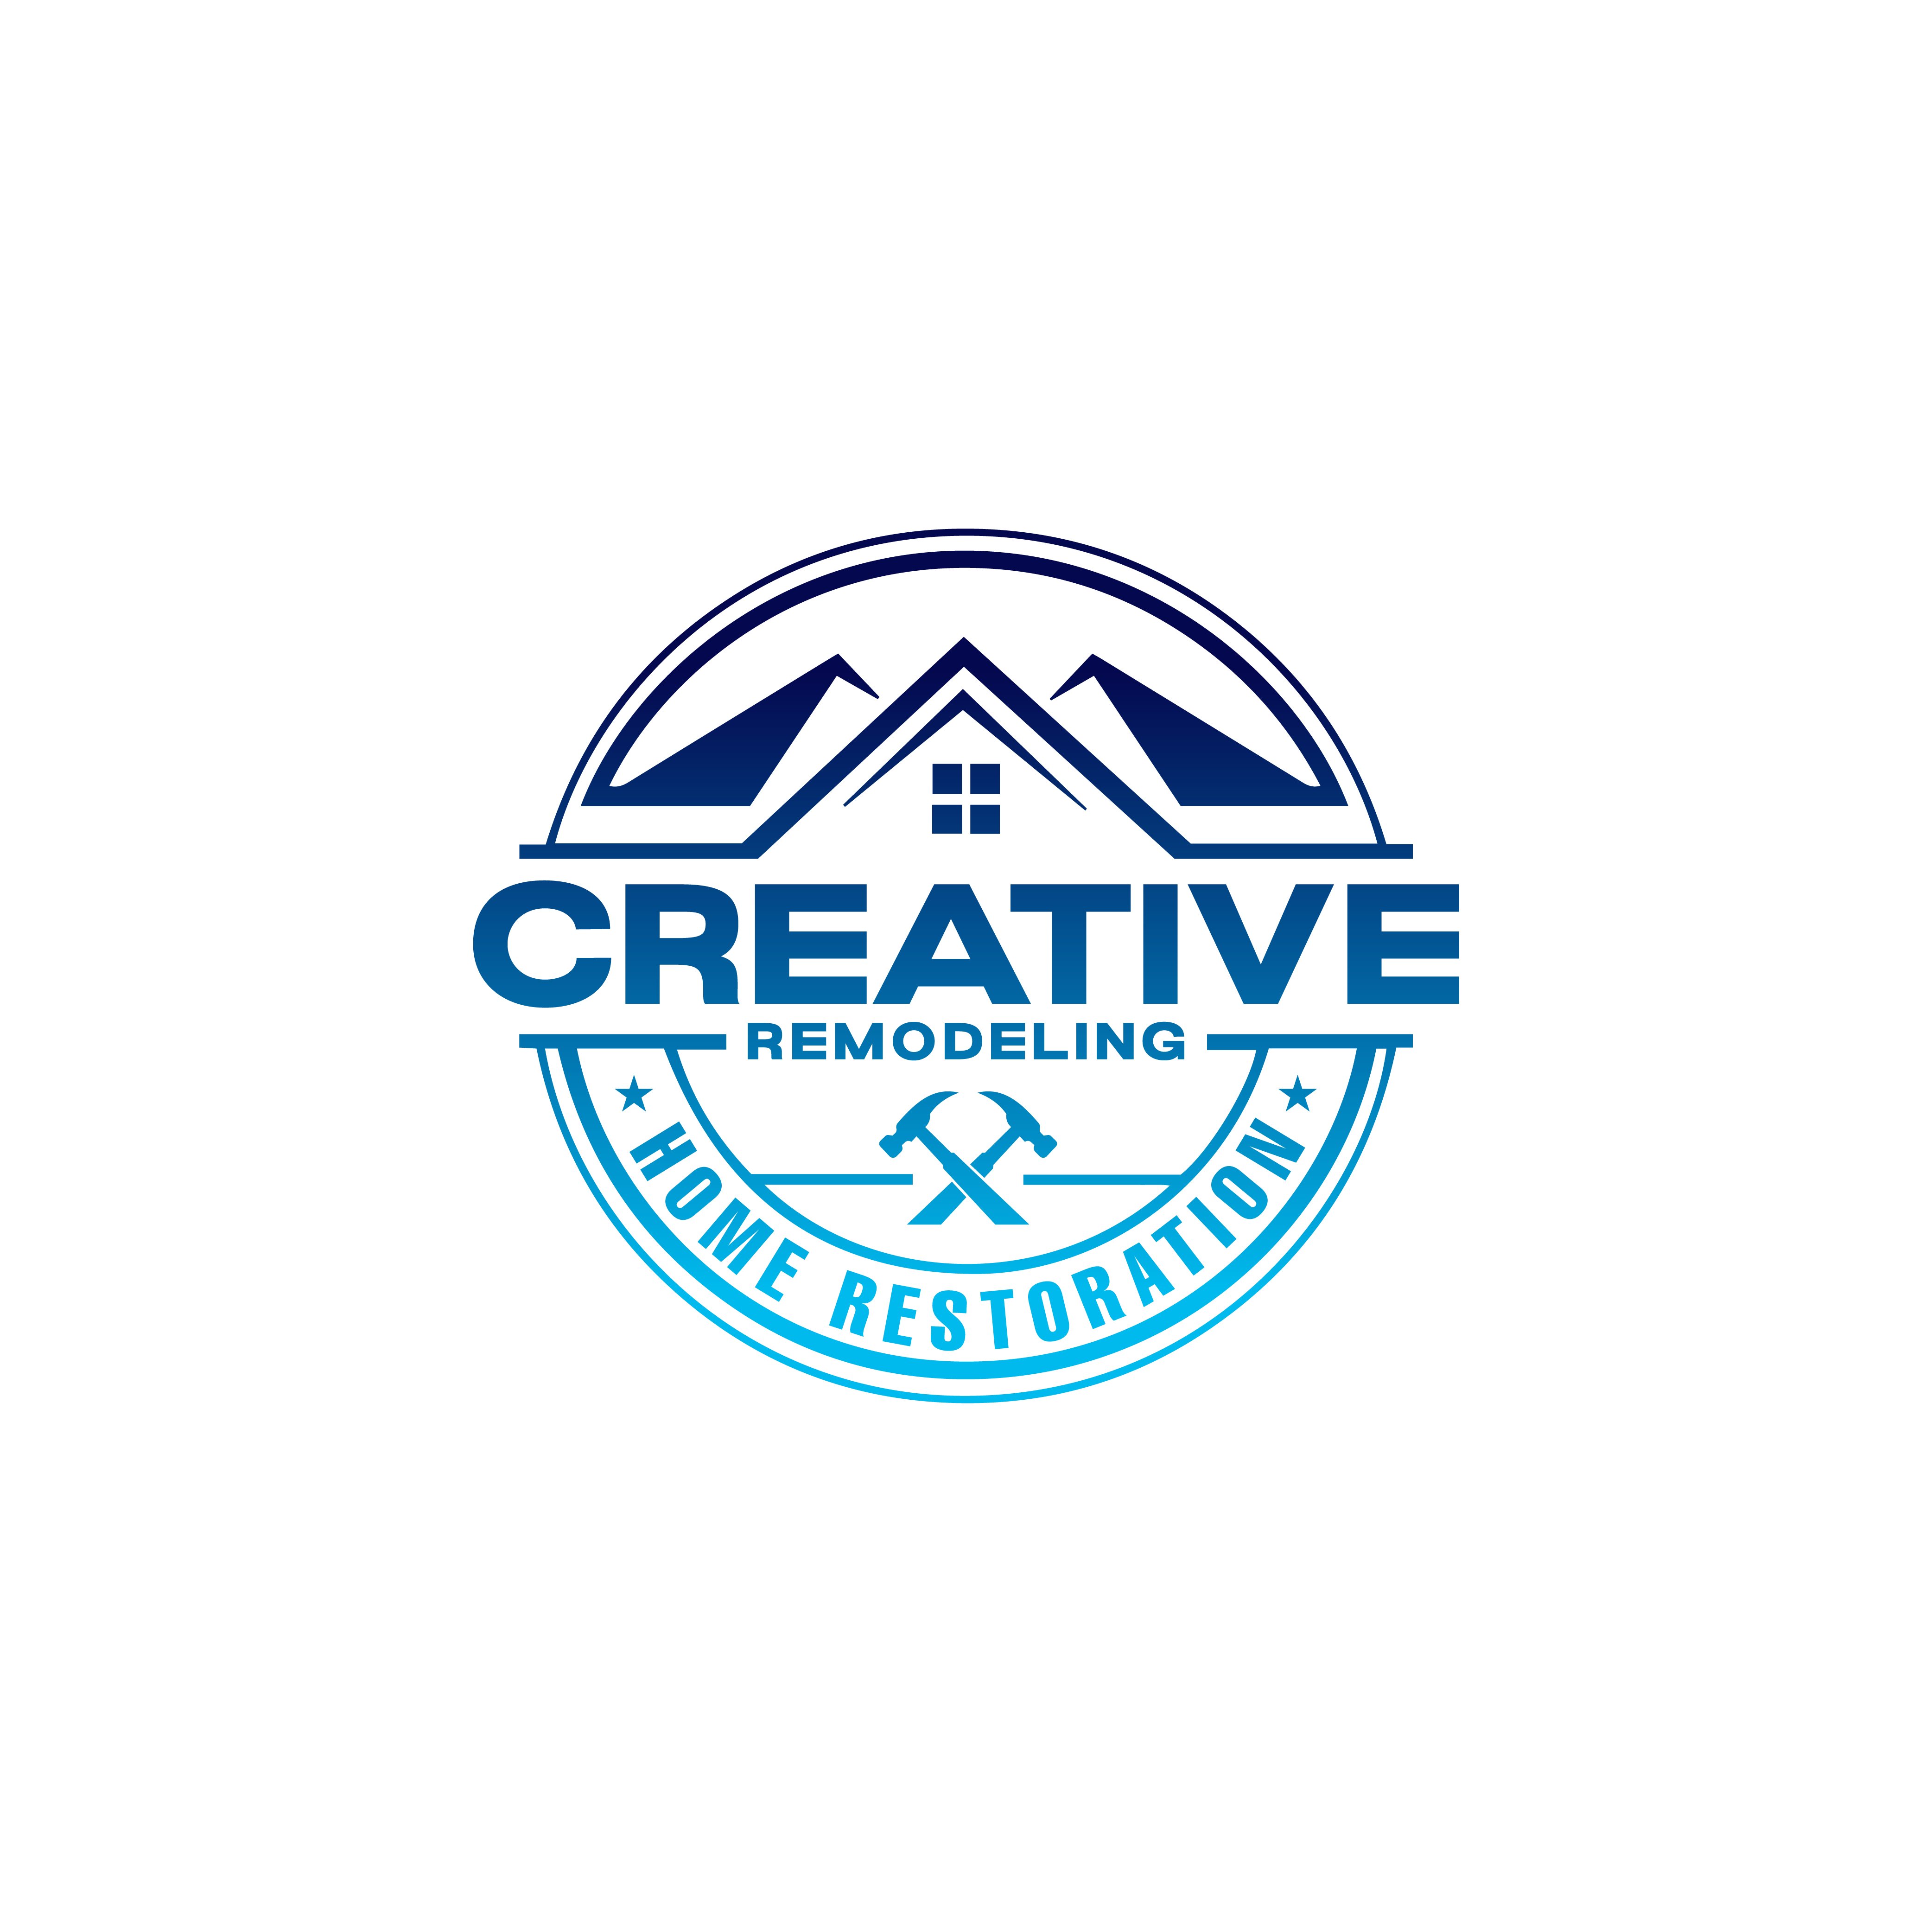 Creative Remodeling and Home Restoration Logo